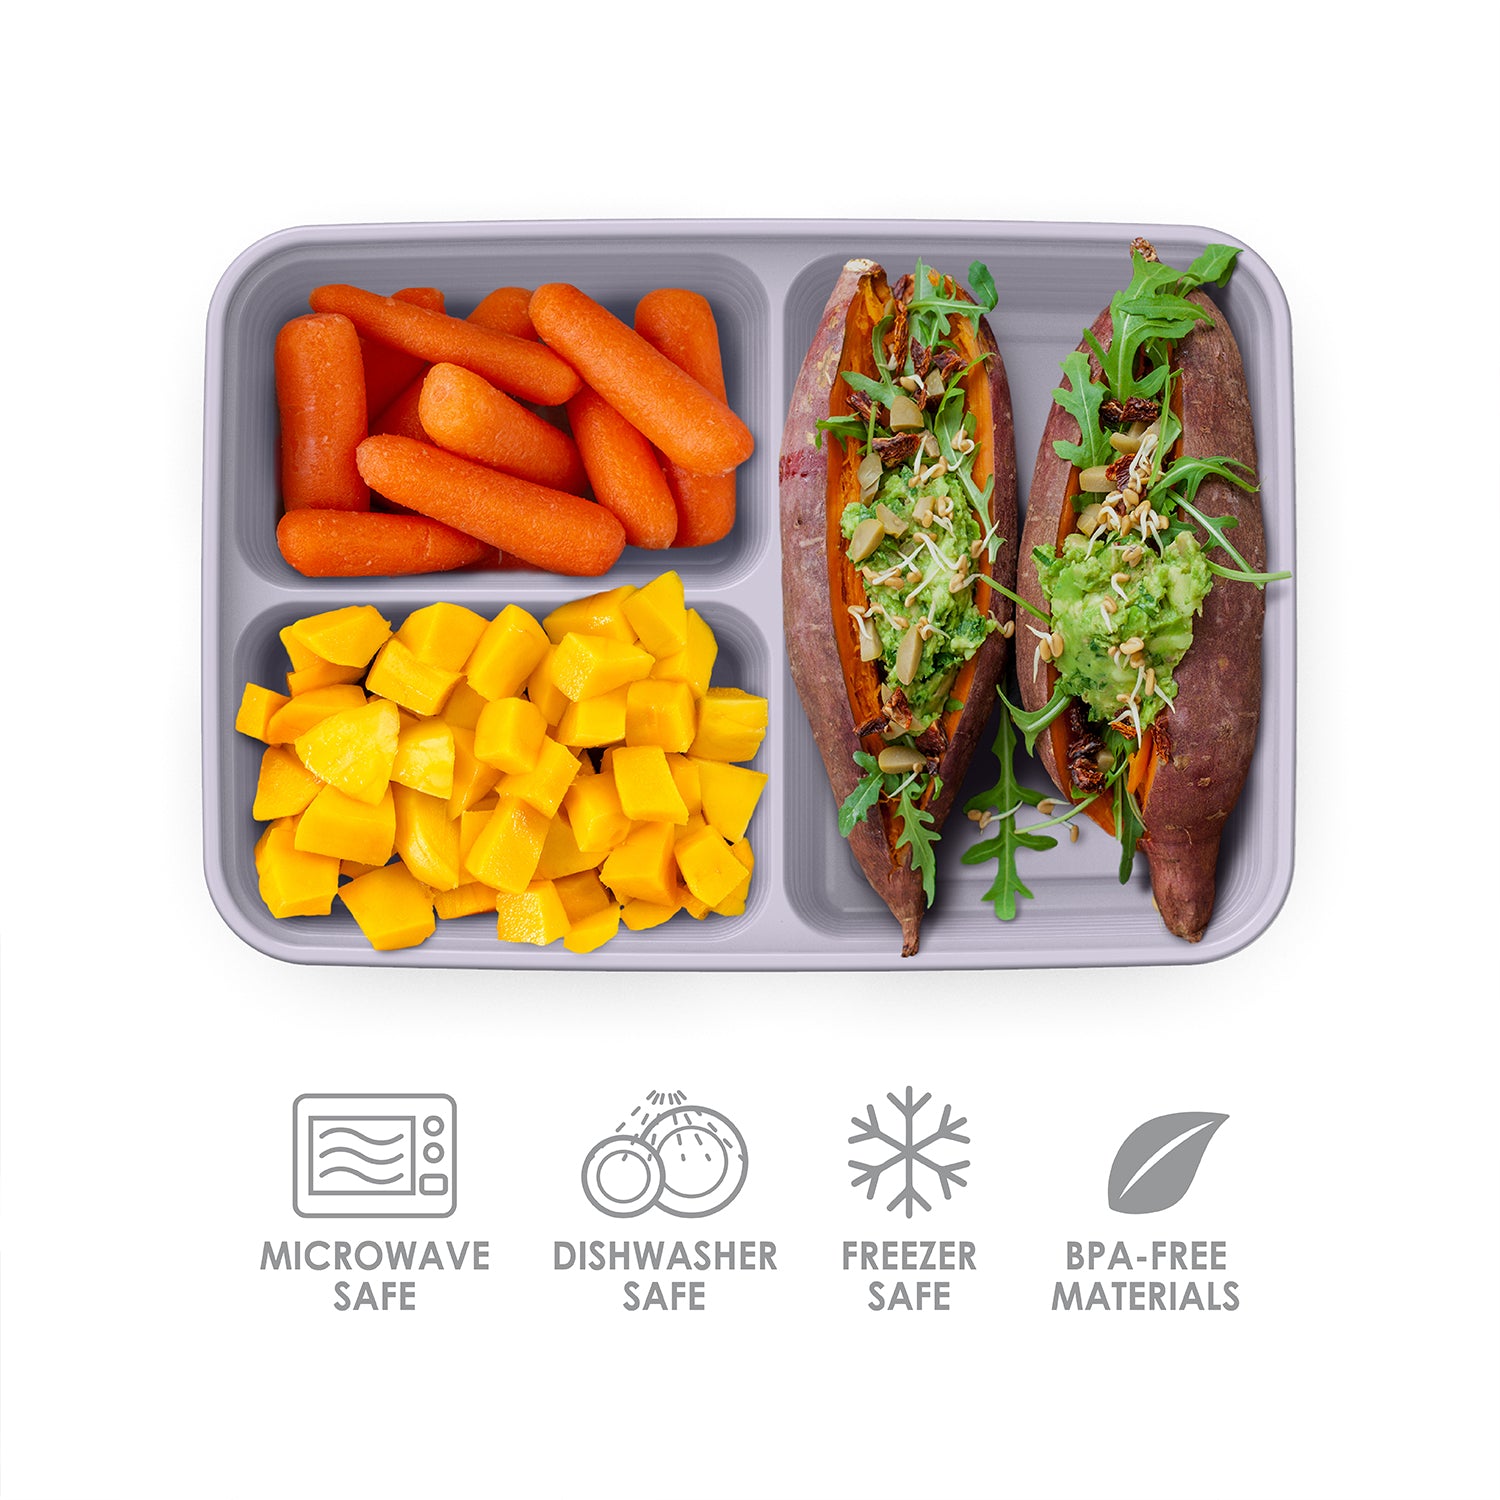 BENTGO MEAL PREP CONTAINERS 3-COMPARTMENT 20 PC. SET BGPRP3-NB